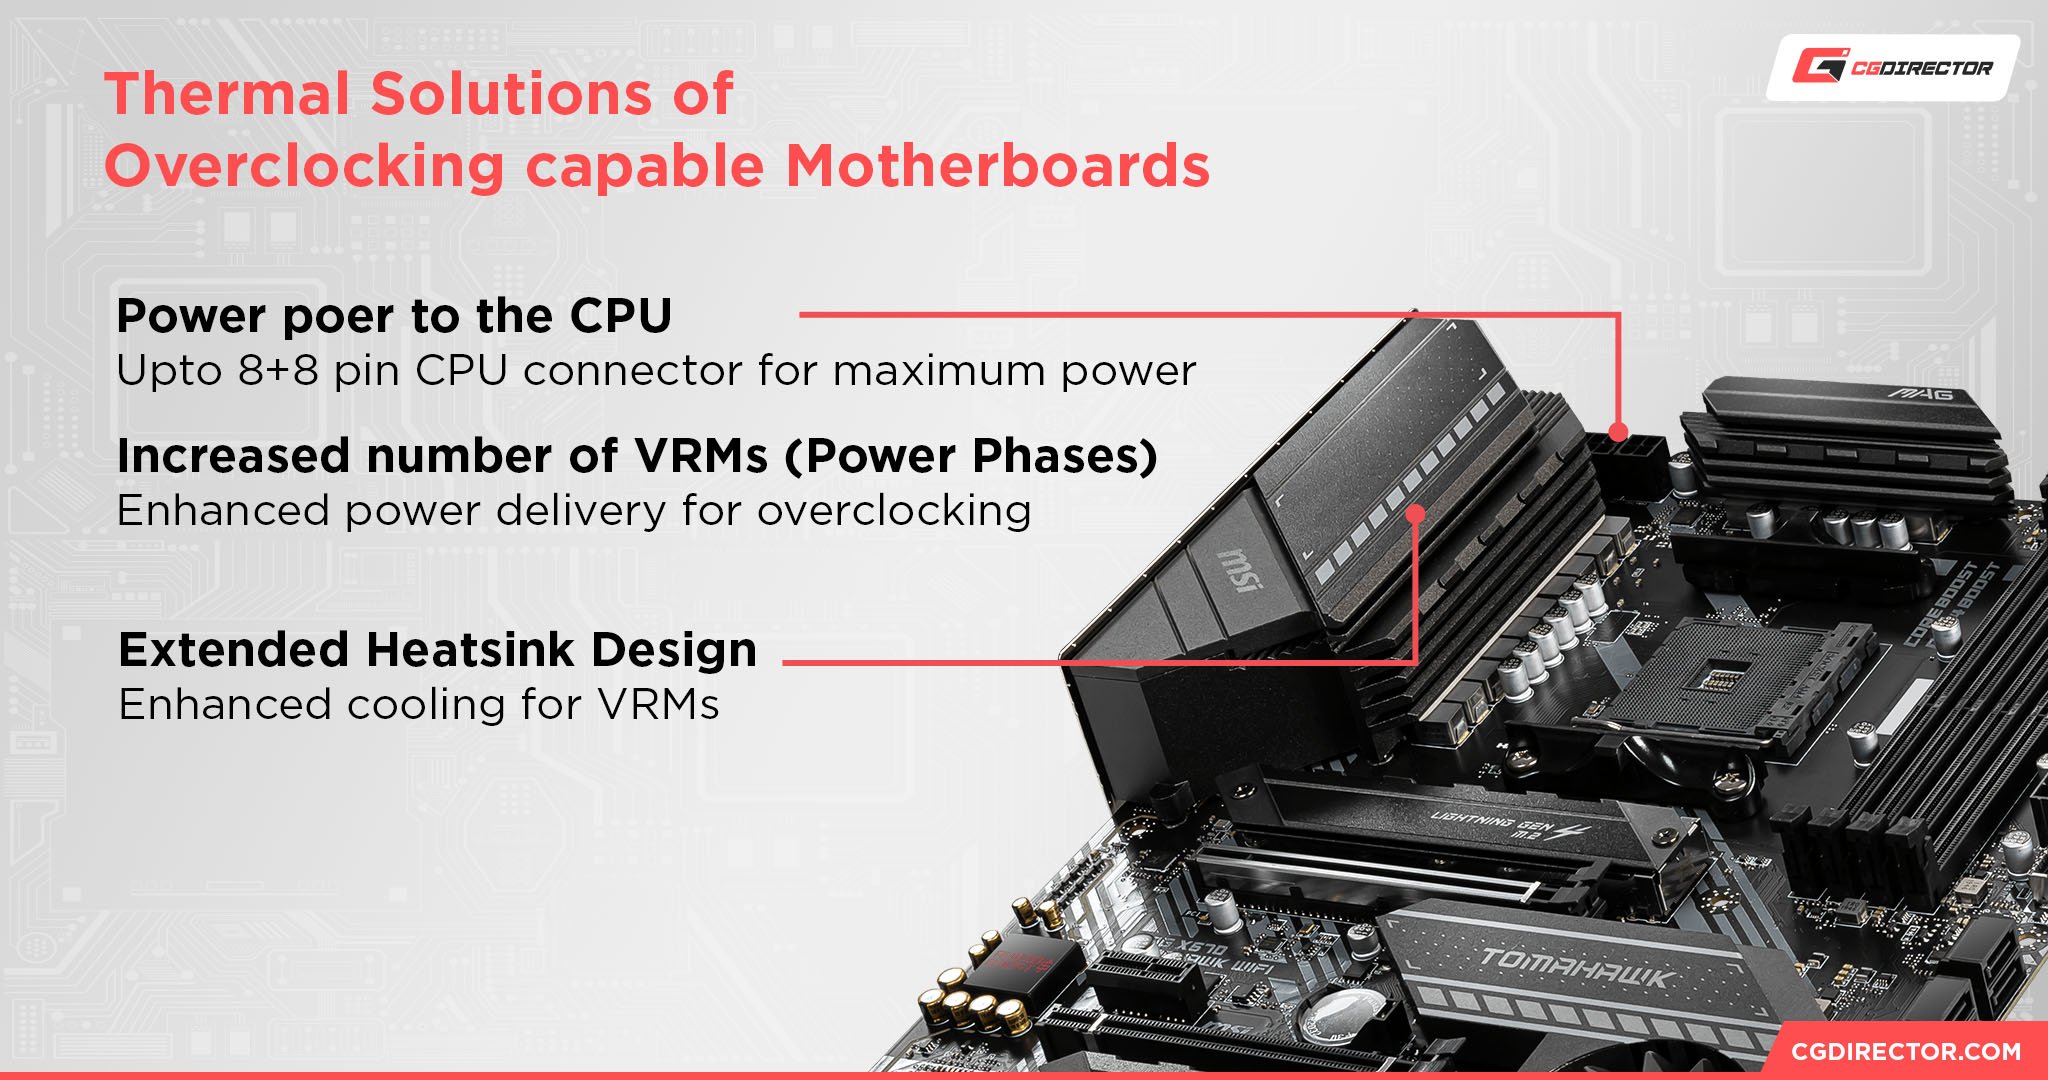 Thermal Solutions of Overclocking Capable Motherboards